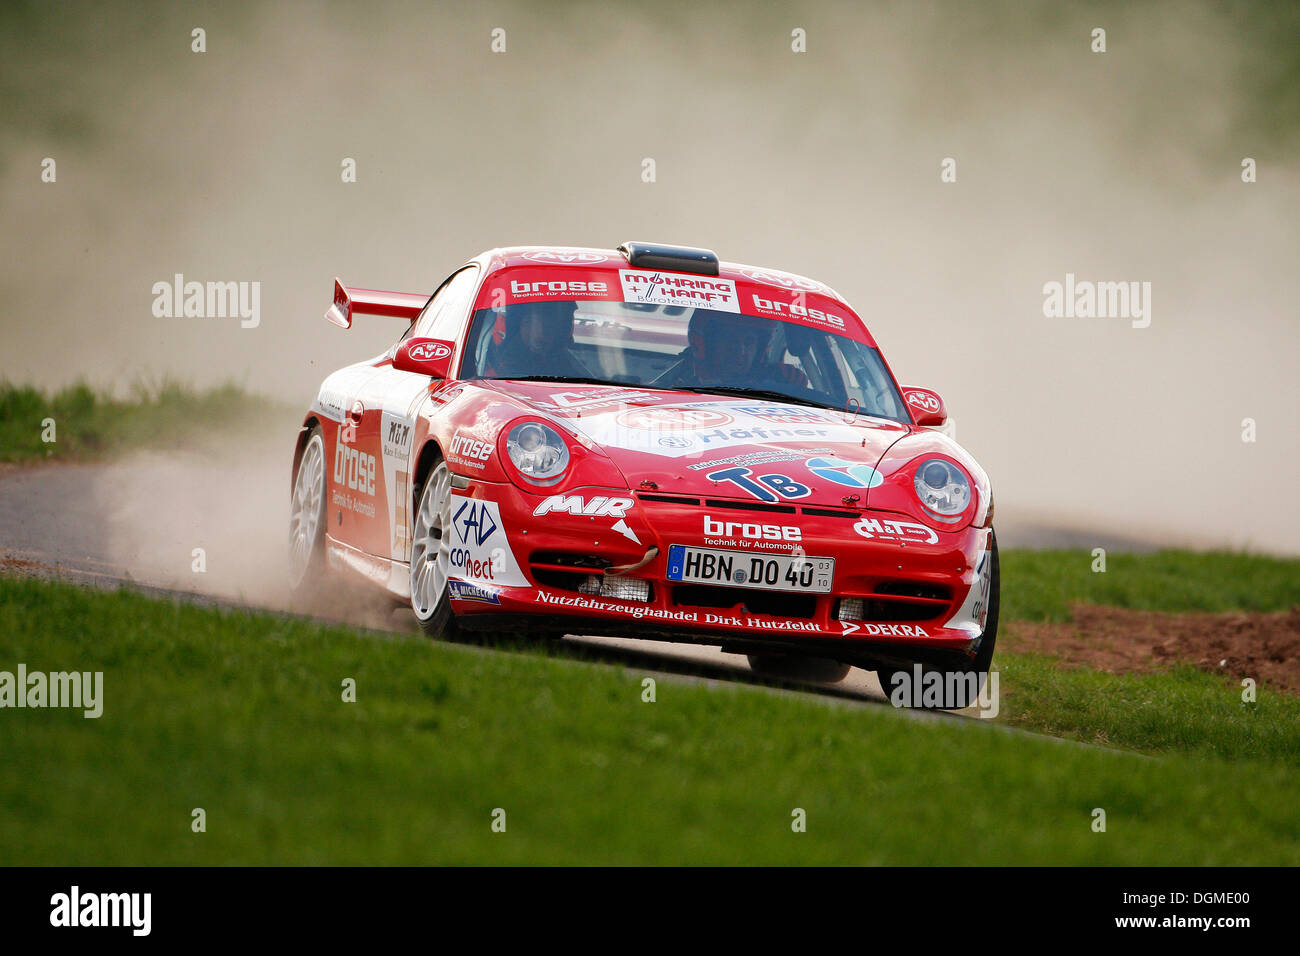 Olaf Dobberkau, champion of the German Rally Series 2010, driving a Porsche 911 GT 3 996 during the German Rally Championship Stock Photo